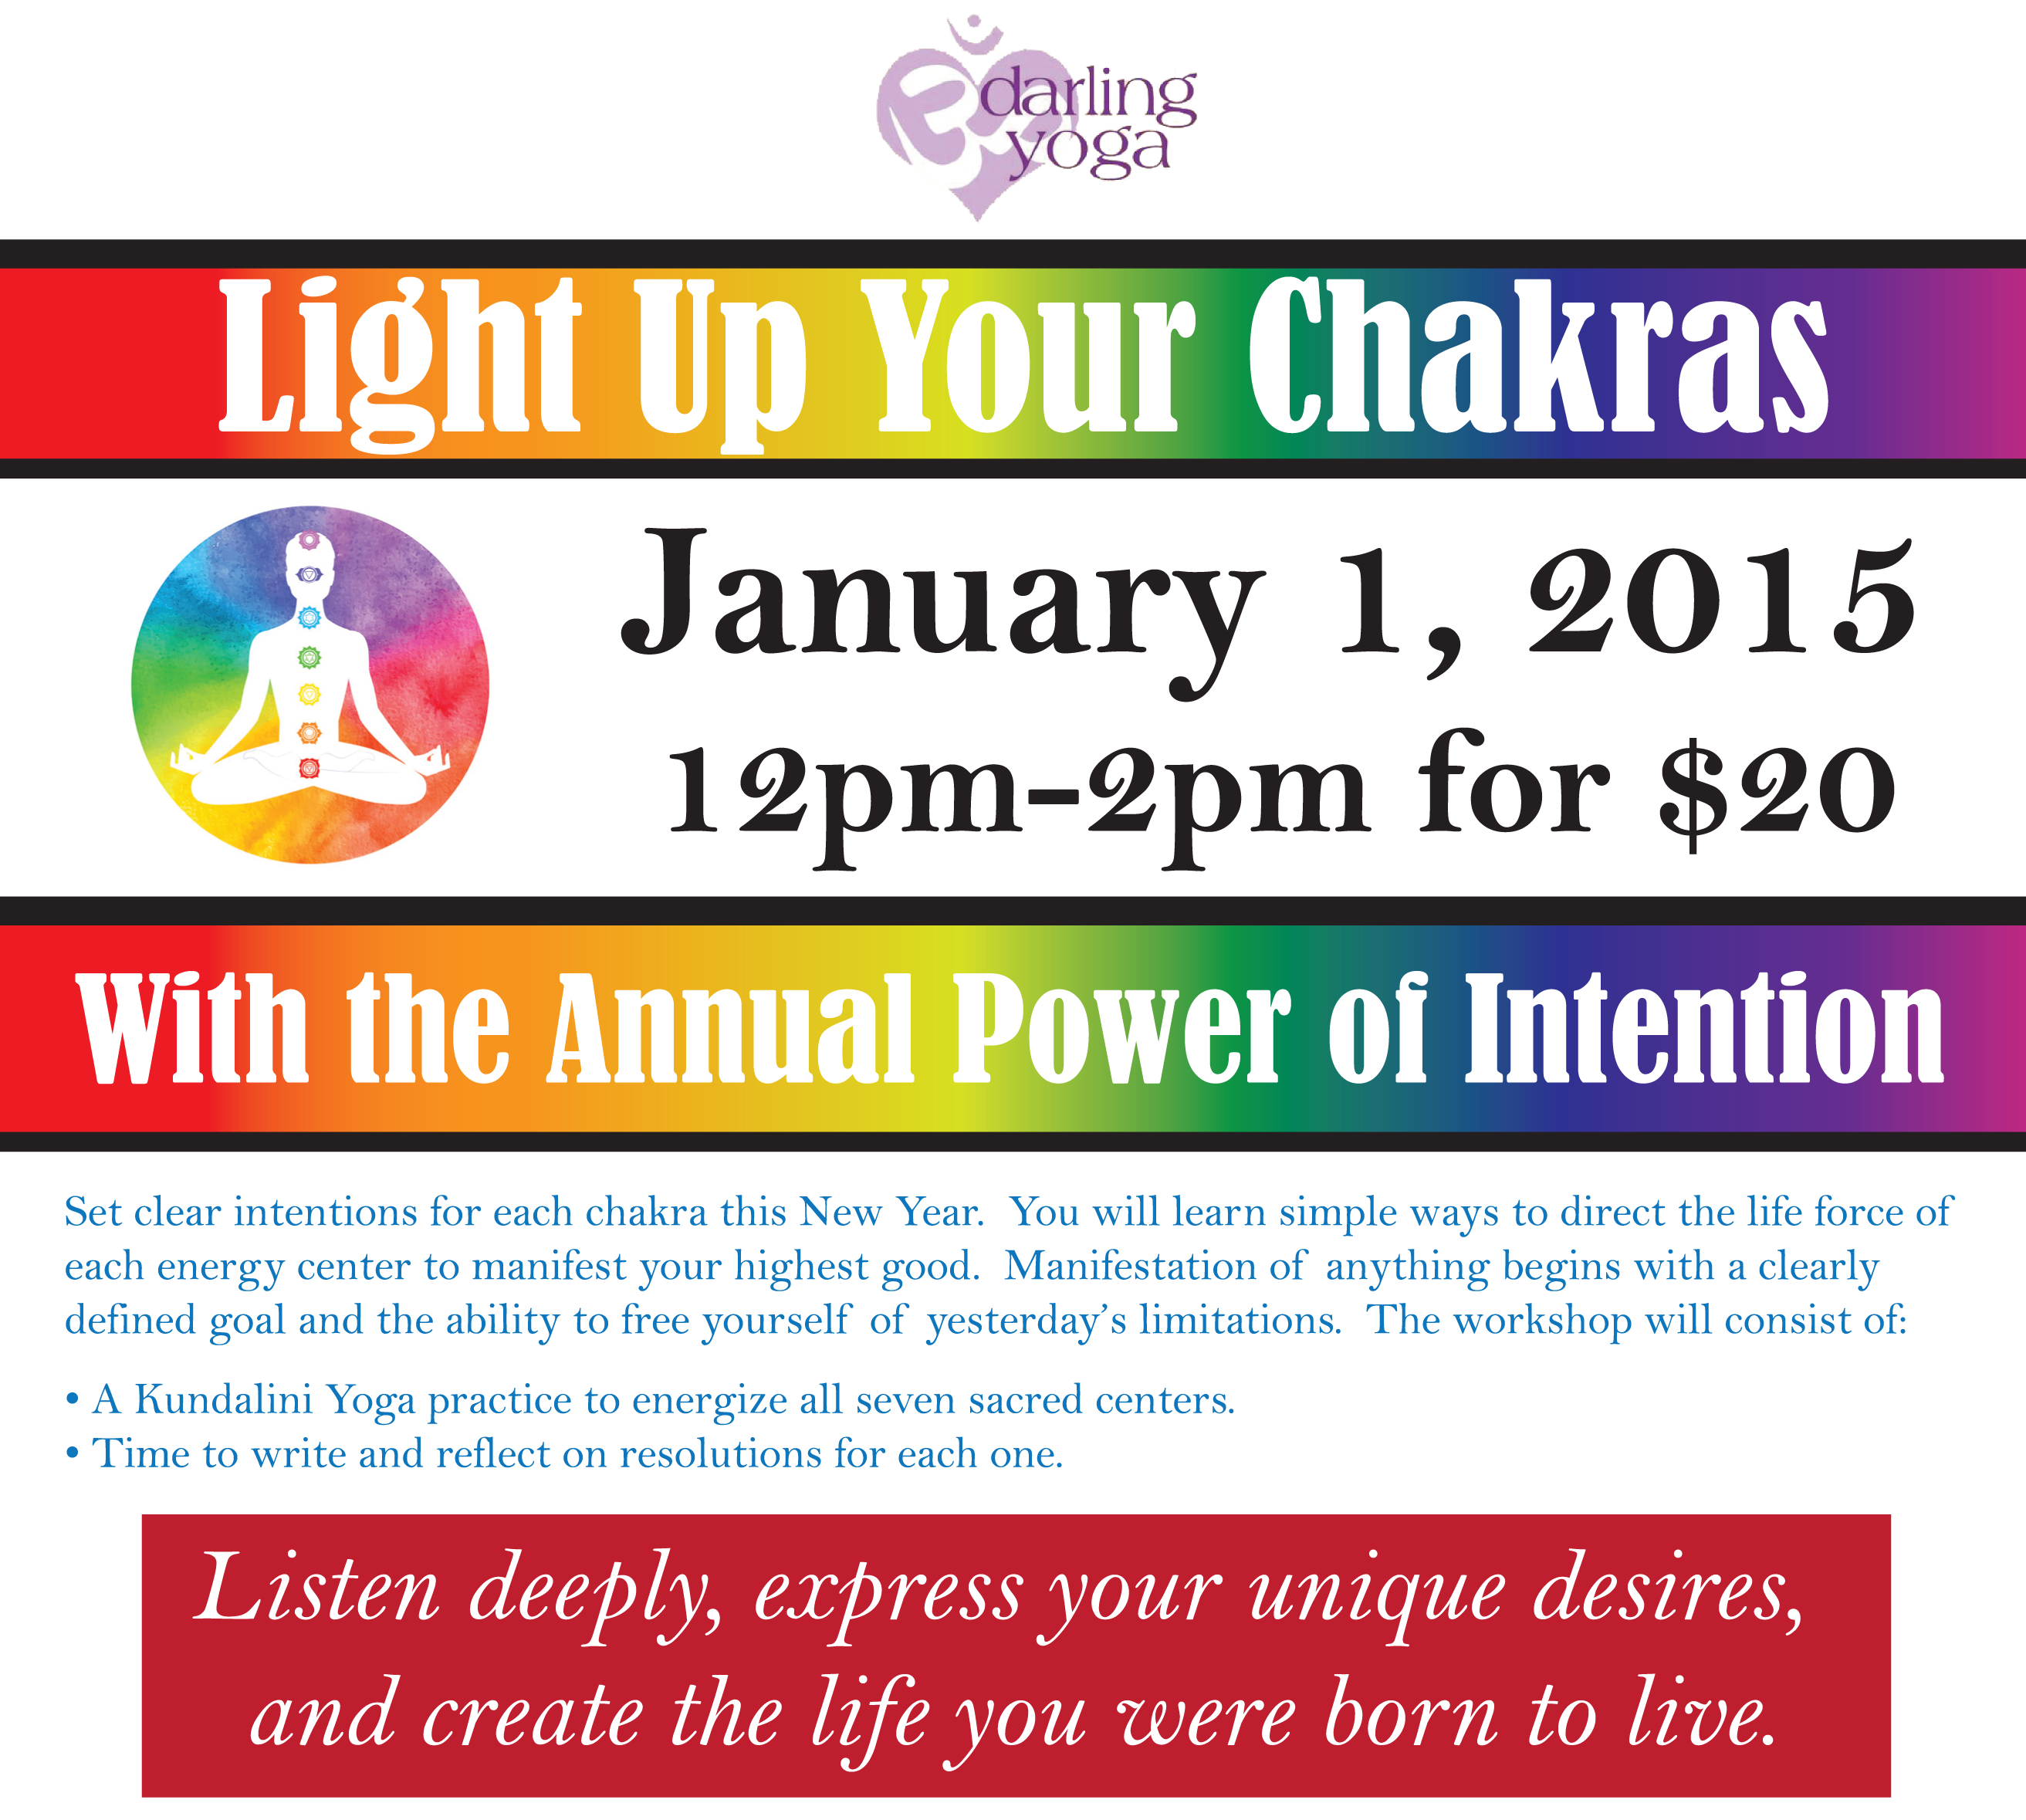 January 1, 2015 – HARNESS THE POWER OF INTENTION FOR THE NEW YEAR!